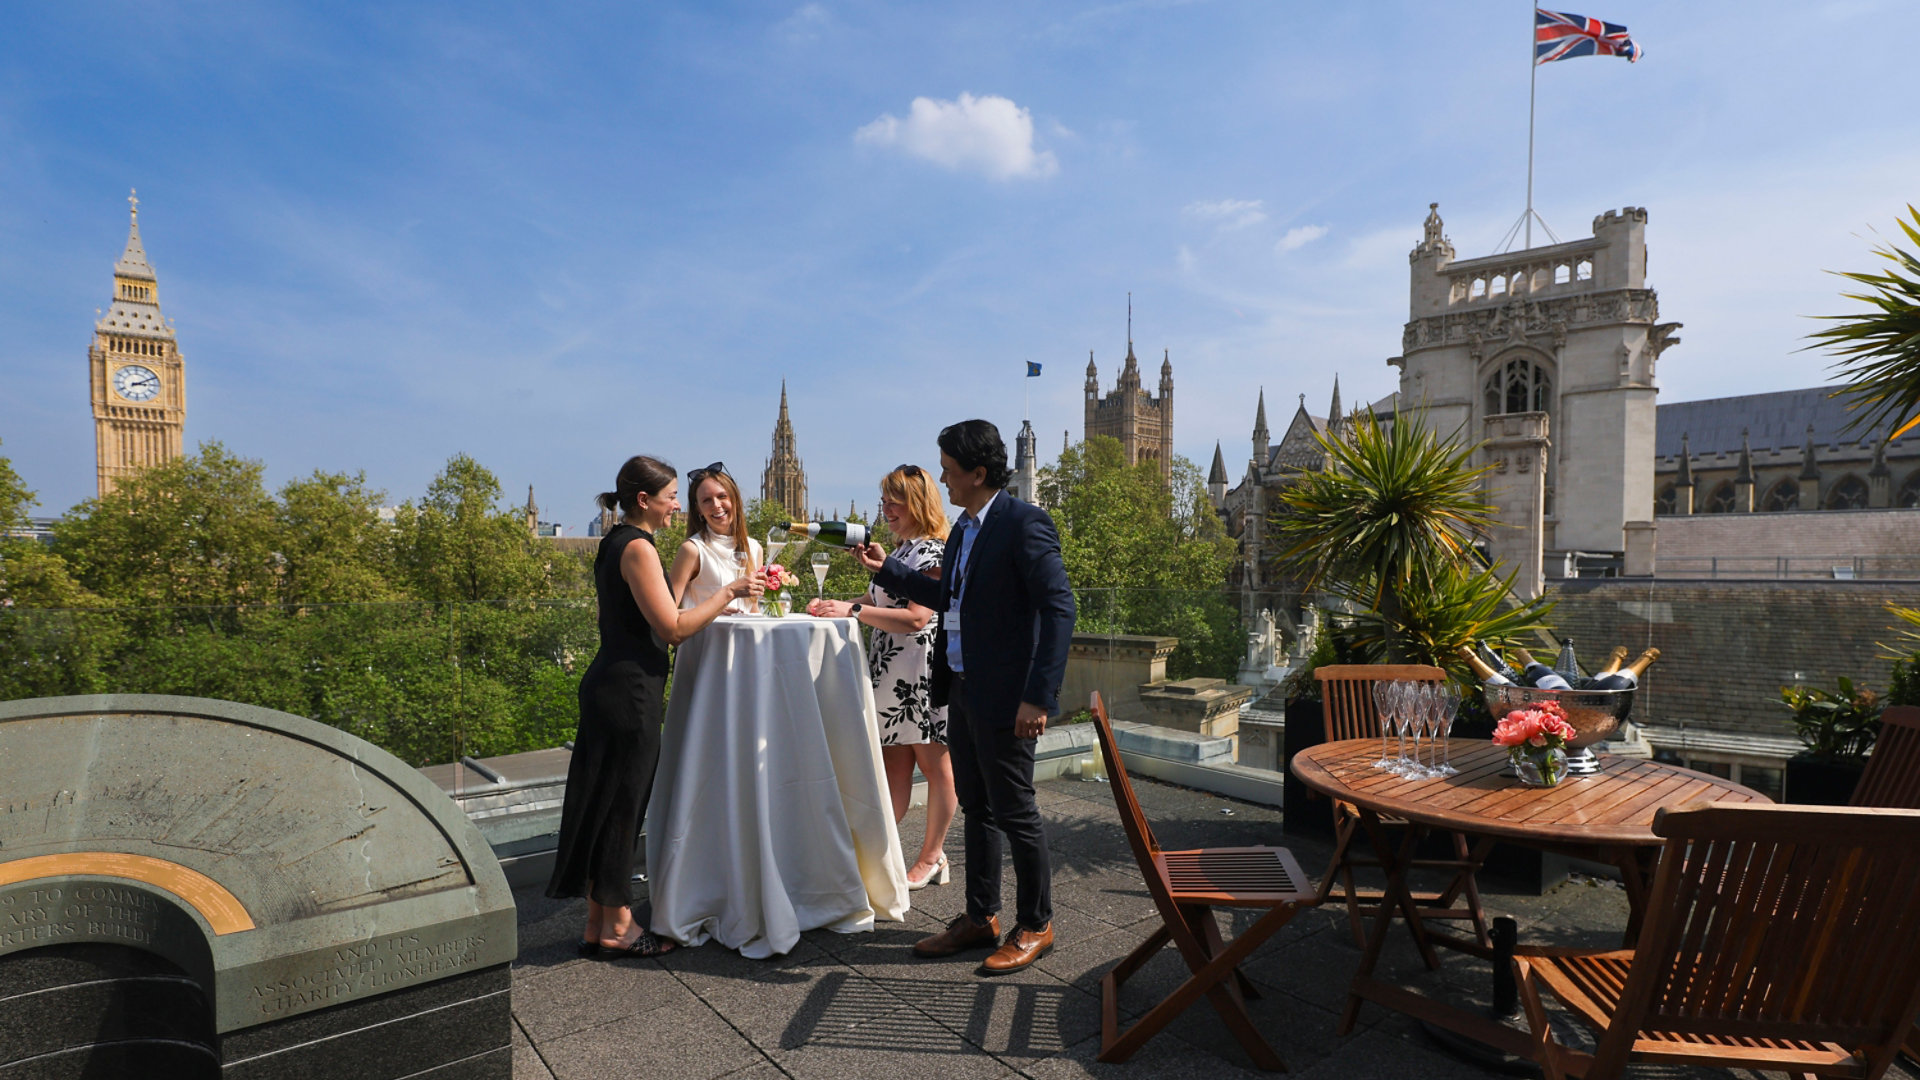 An event on the balcony of RICS London offices